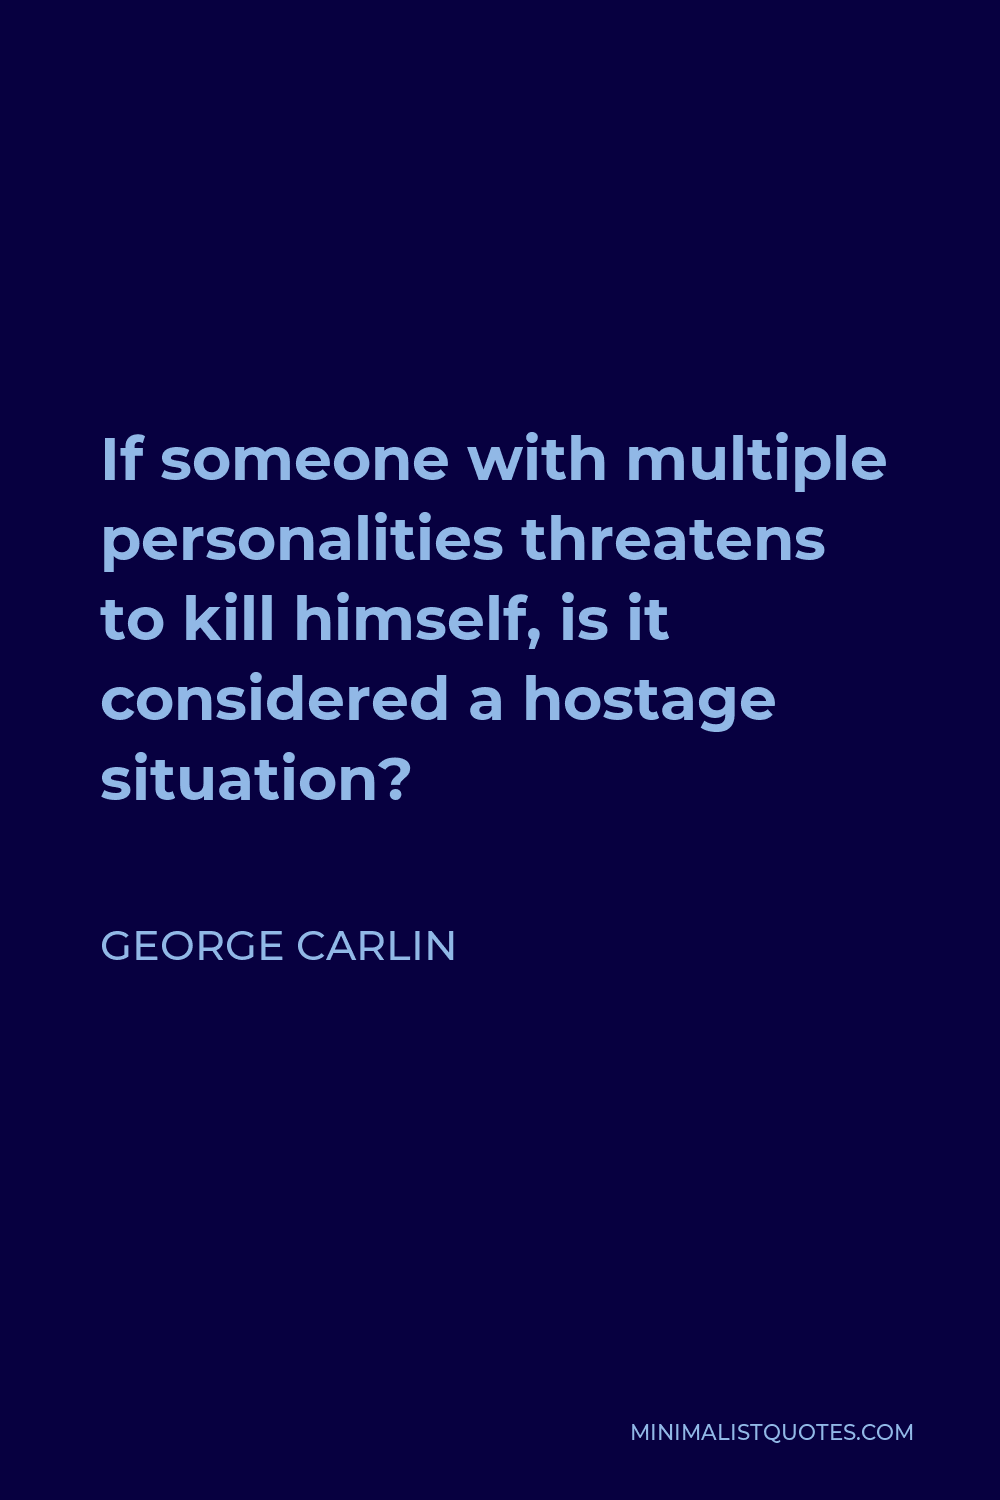 George Carlin Quote - If someone with multiple personalities threatens to kill himself, is it considered a hostage situation?